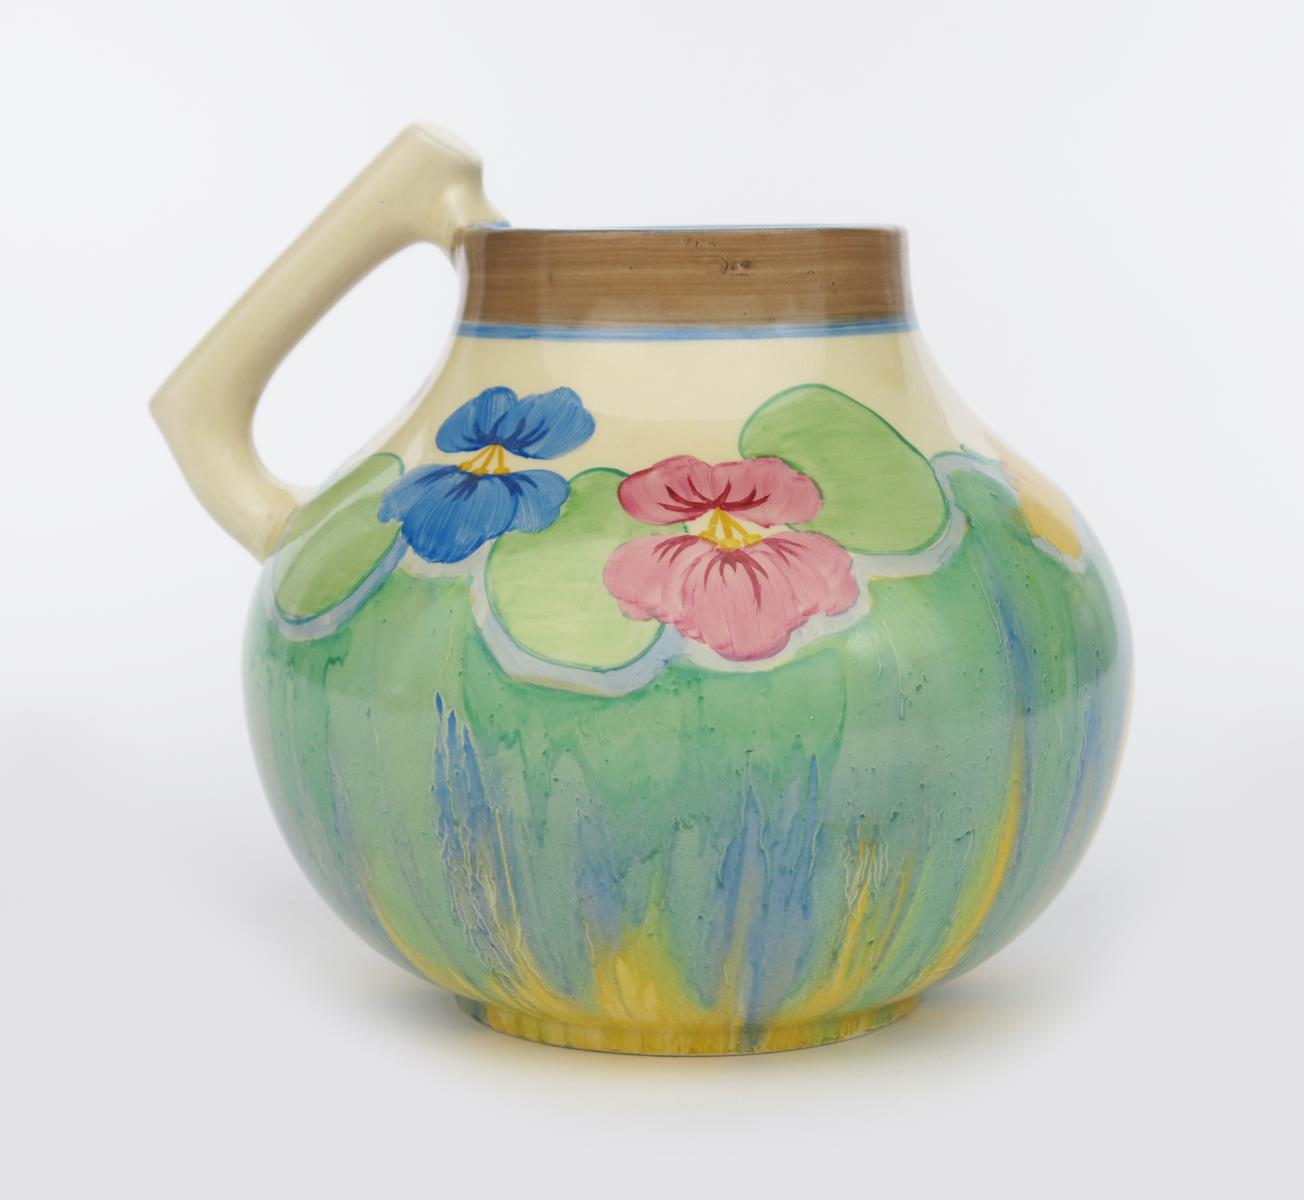 'Delecia Pansies' a Clarice Cliff Bizarre 634 single-handled vase, painted in colours printed